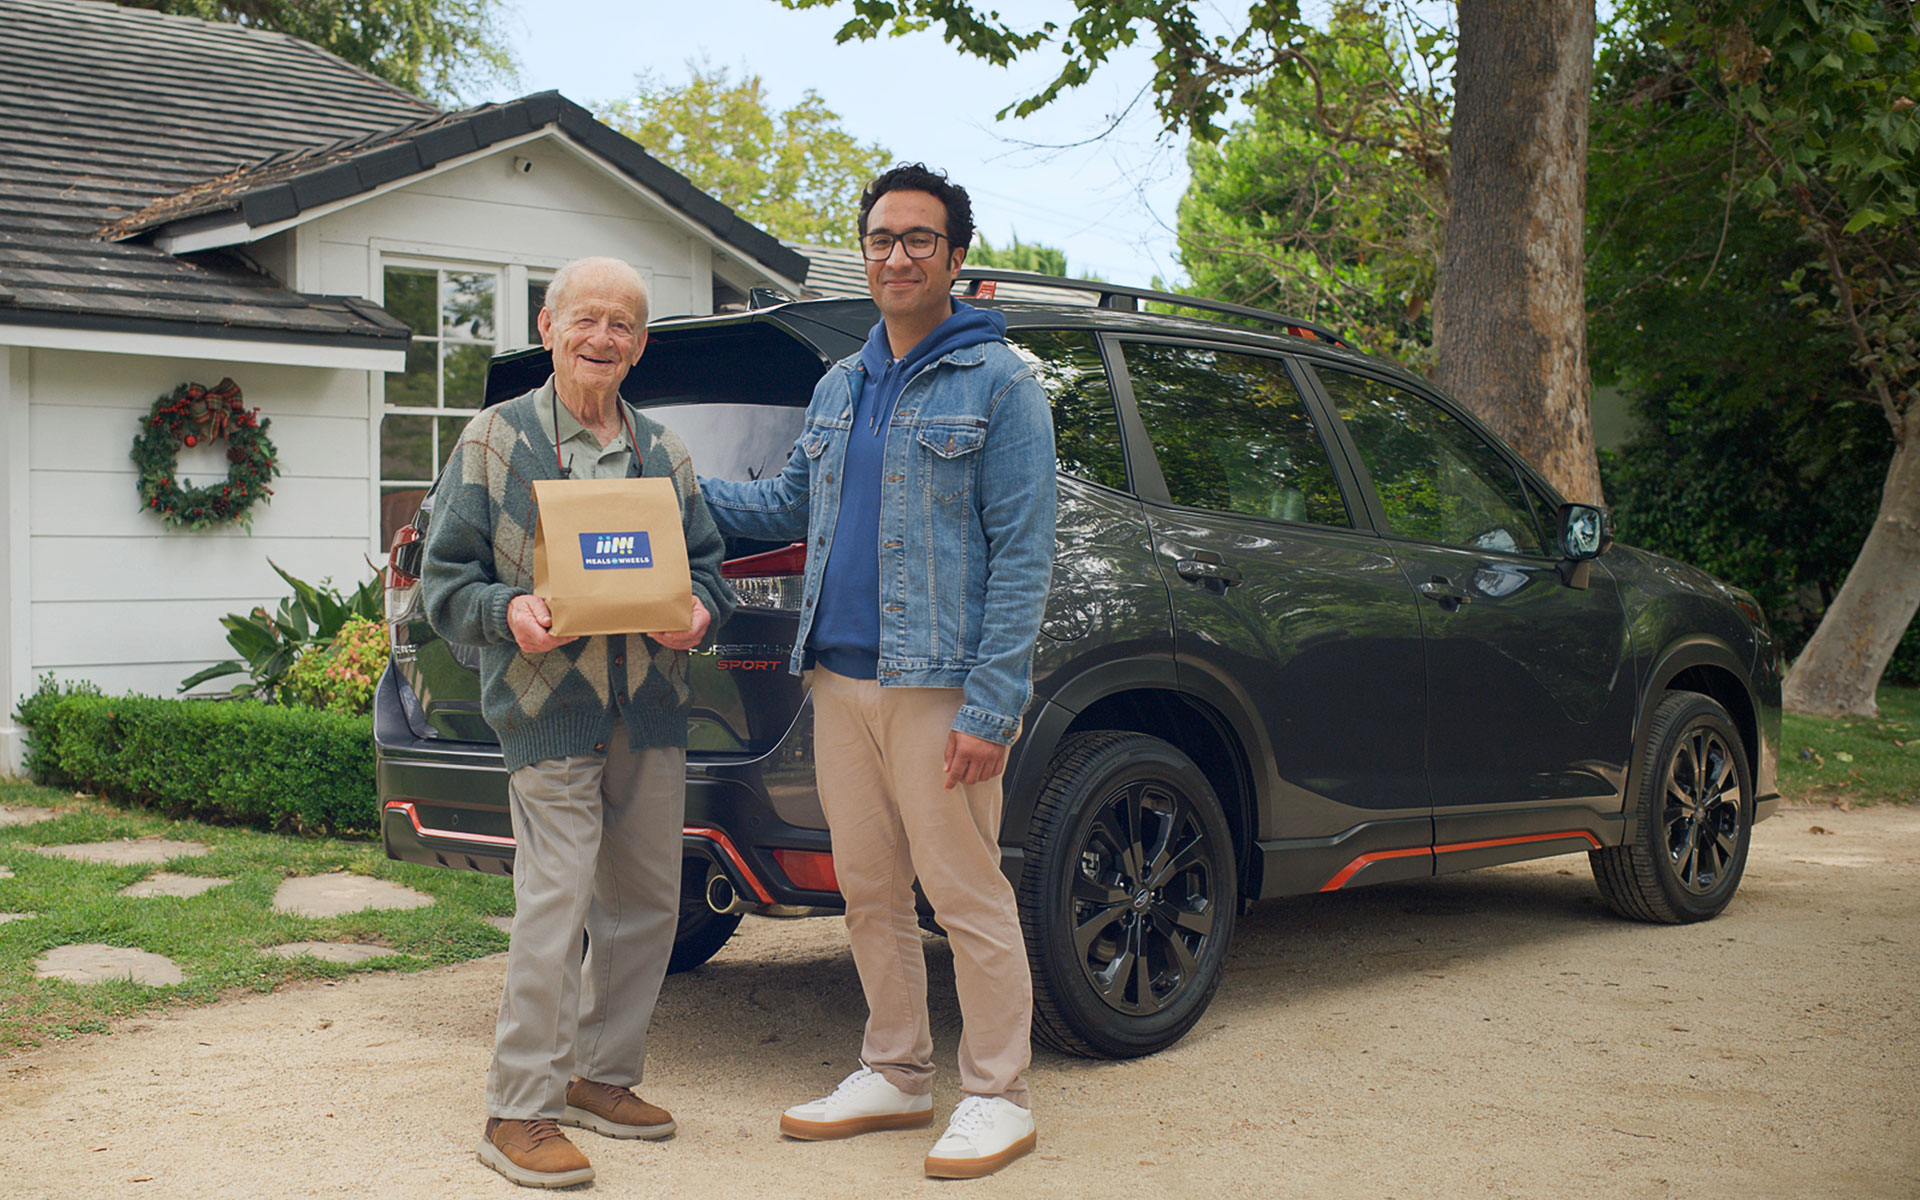 Meals on Wheels volunteer standing with senior in front of Subaru Forester and house.